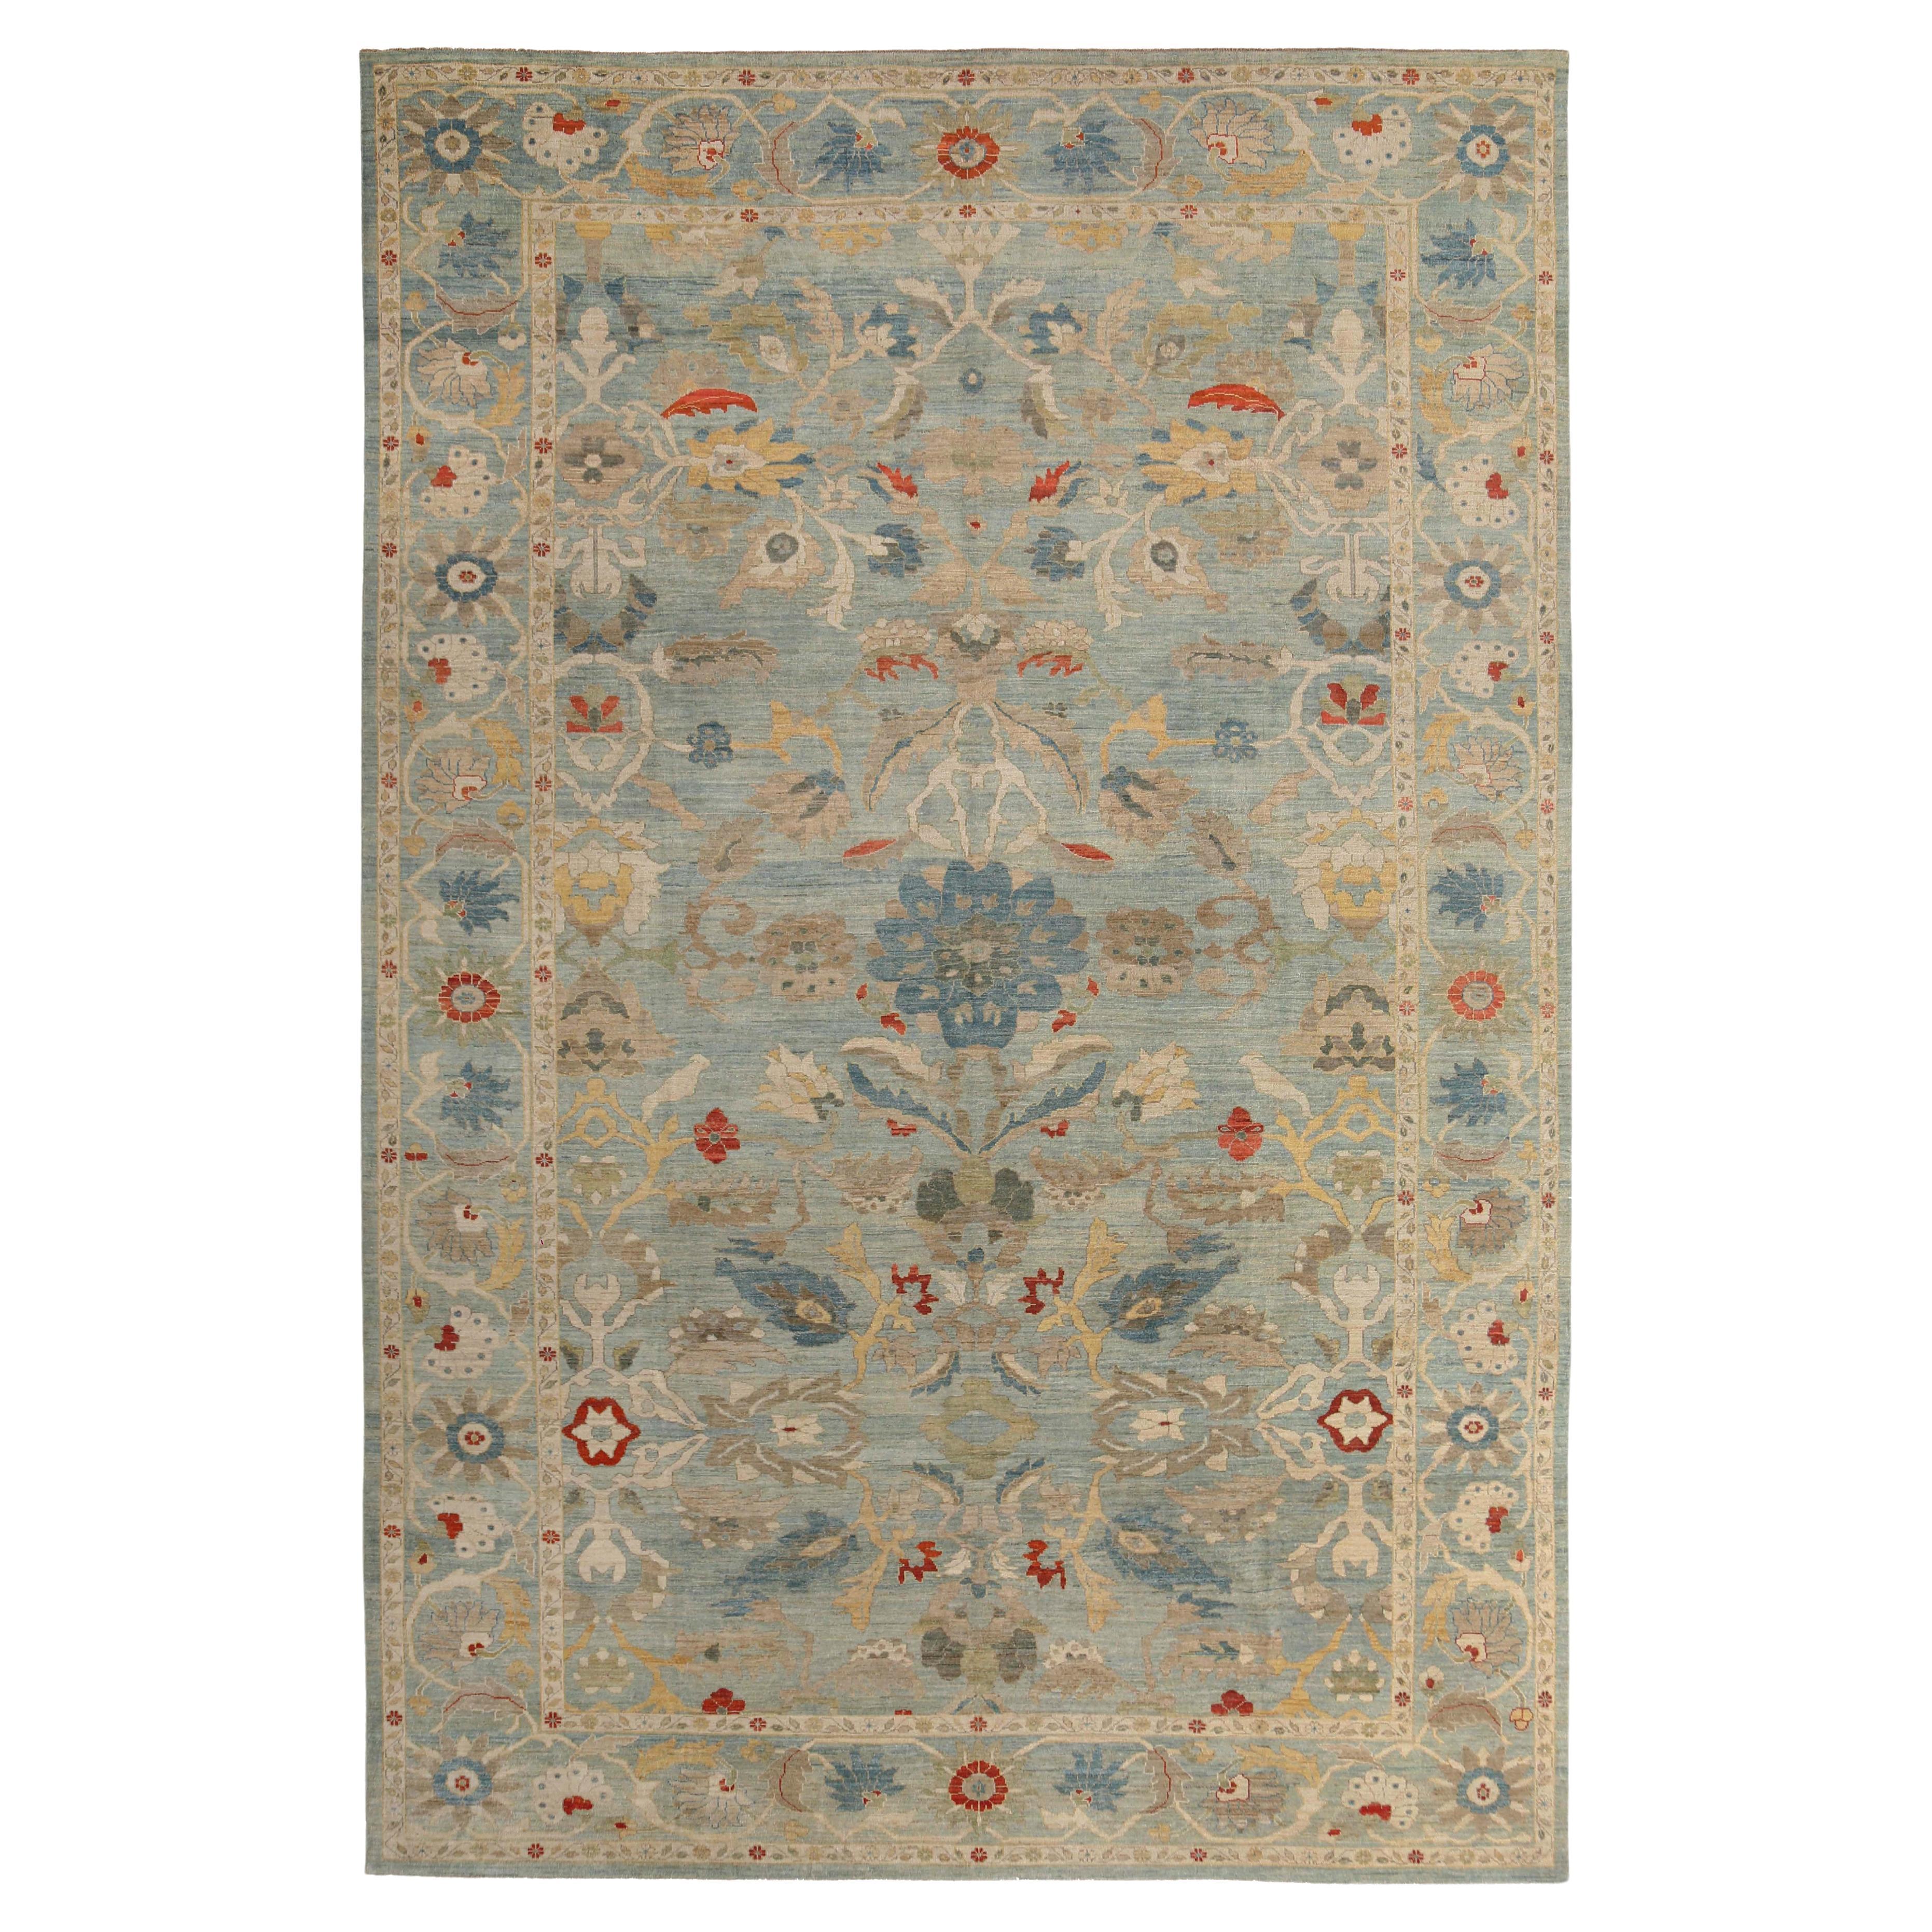 Handmade Turkish Sultanabad Rug - Traditional Design with Blue, Green, and Red C For Sale